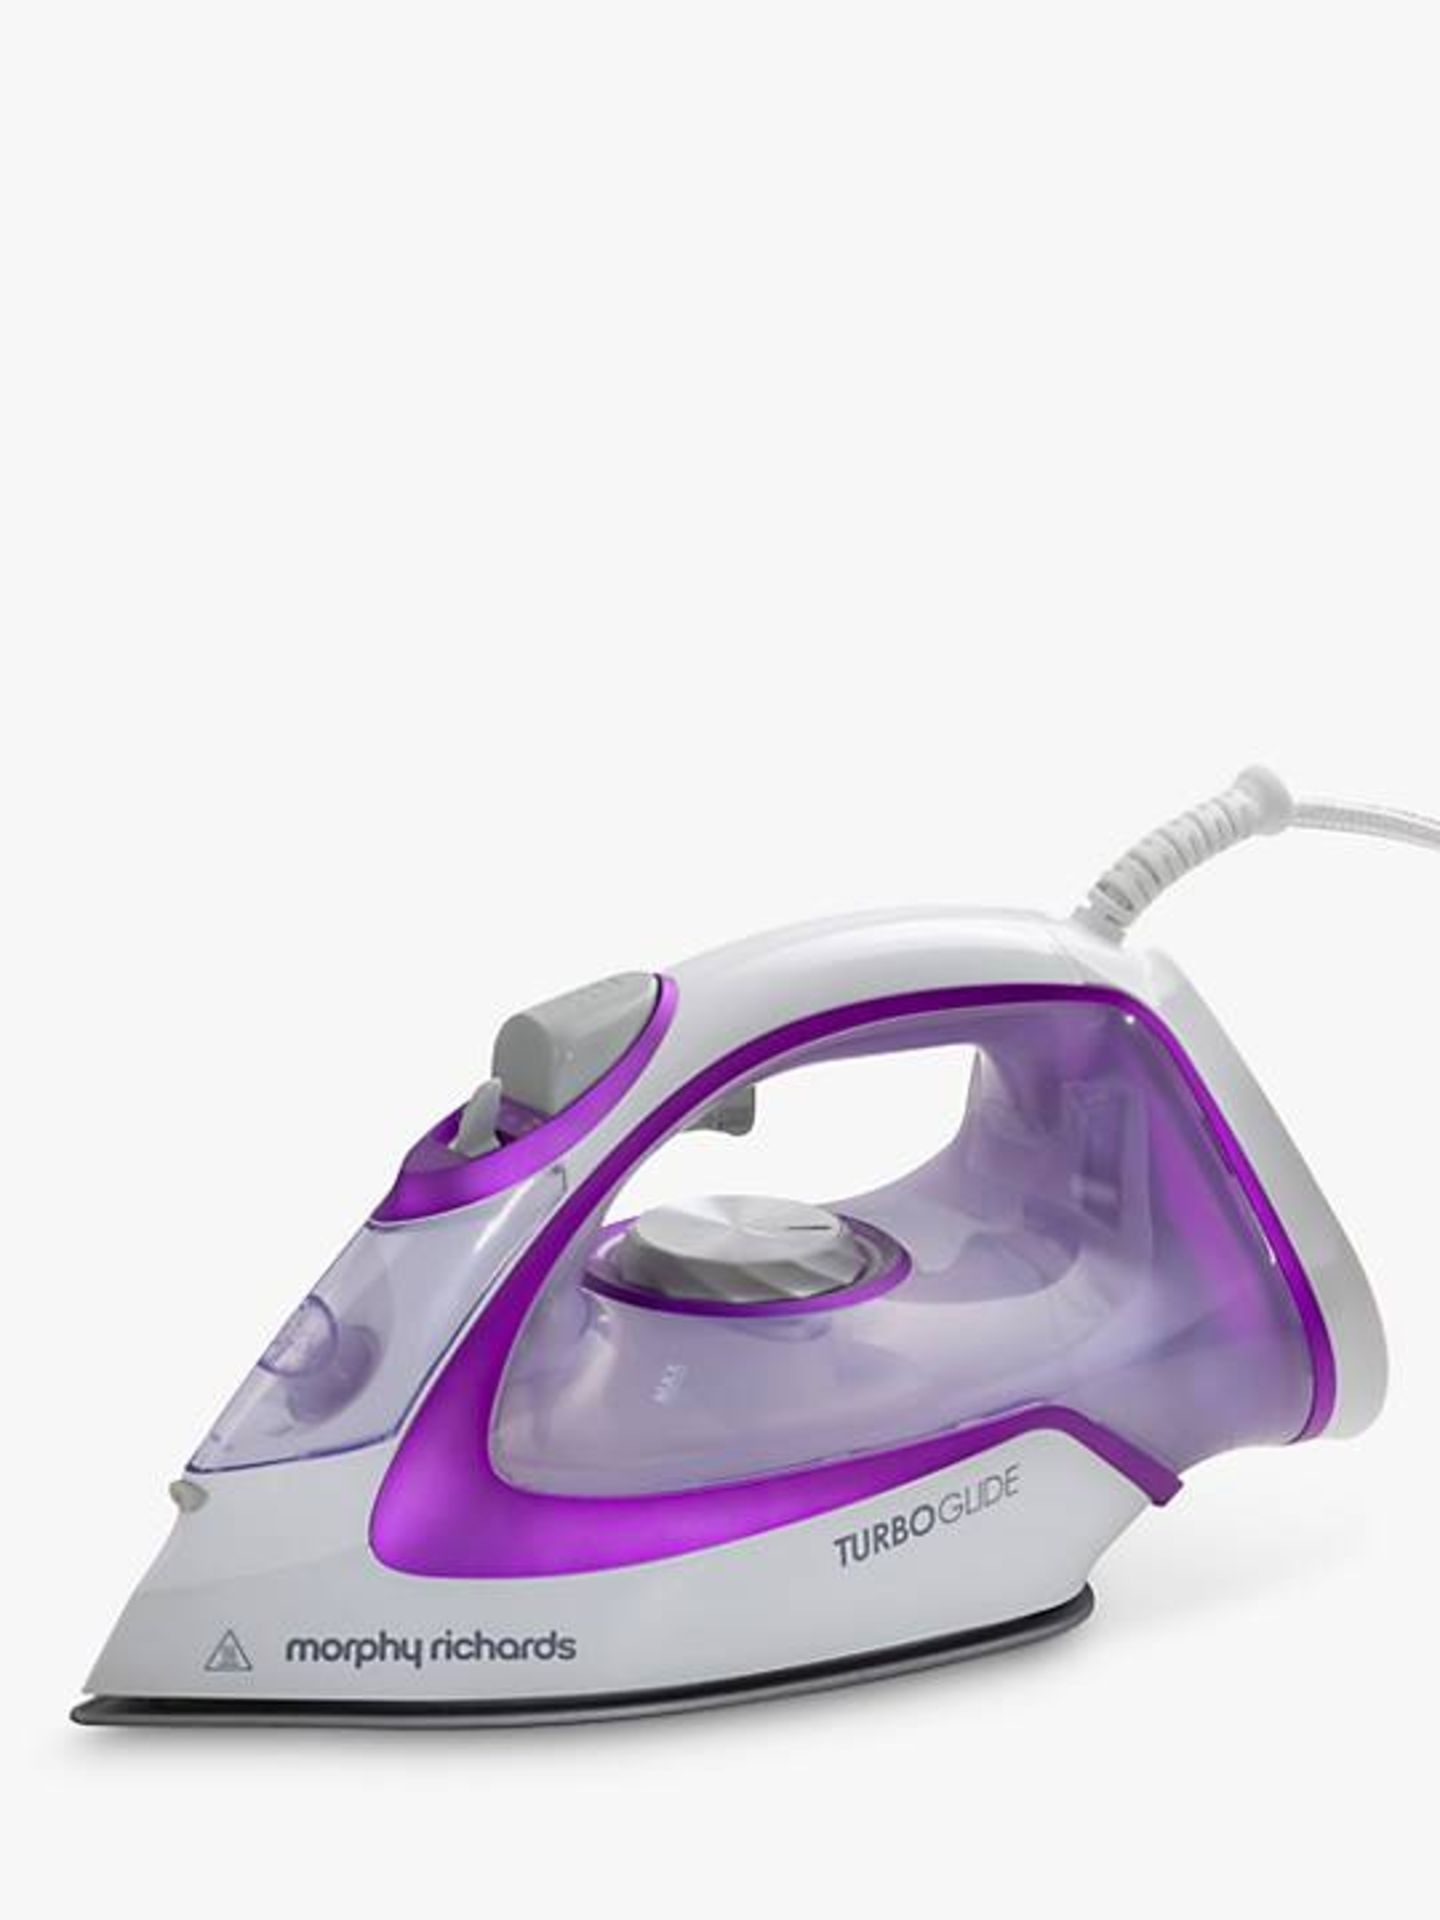 Morphy Richards 302000 Turbo Glide Steam Iron RRP £49.99